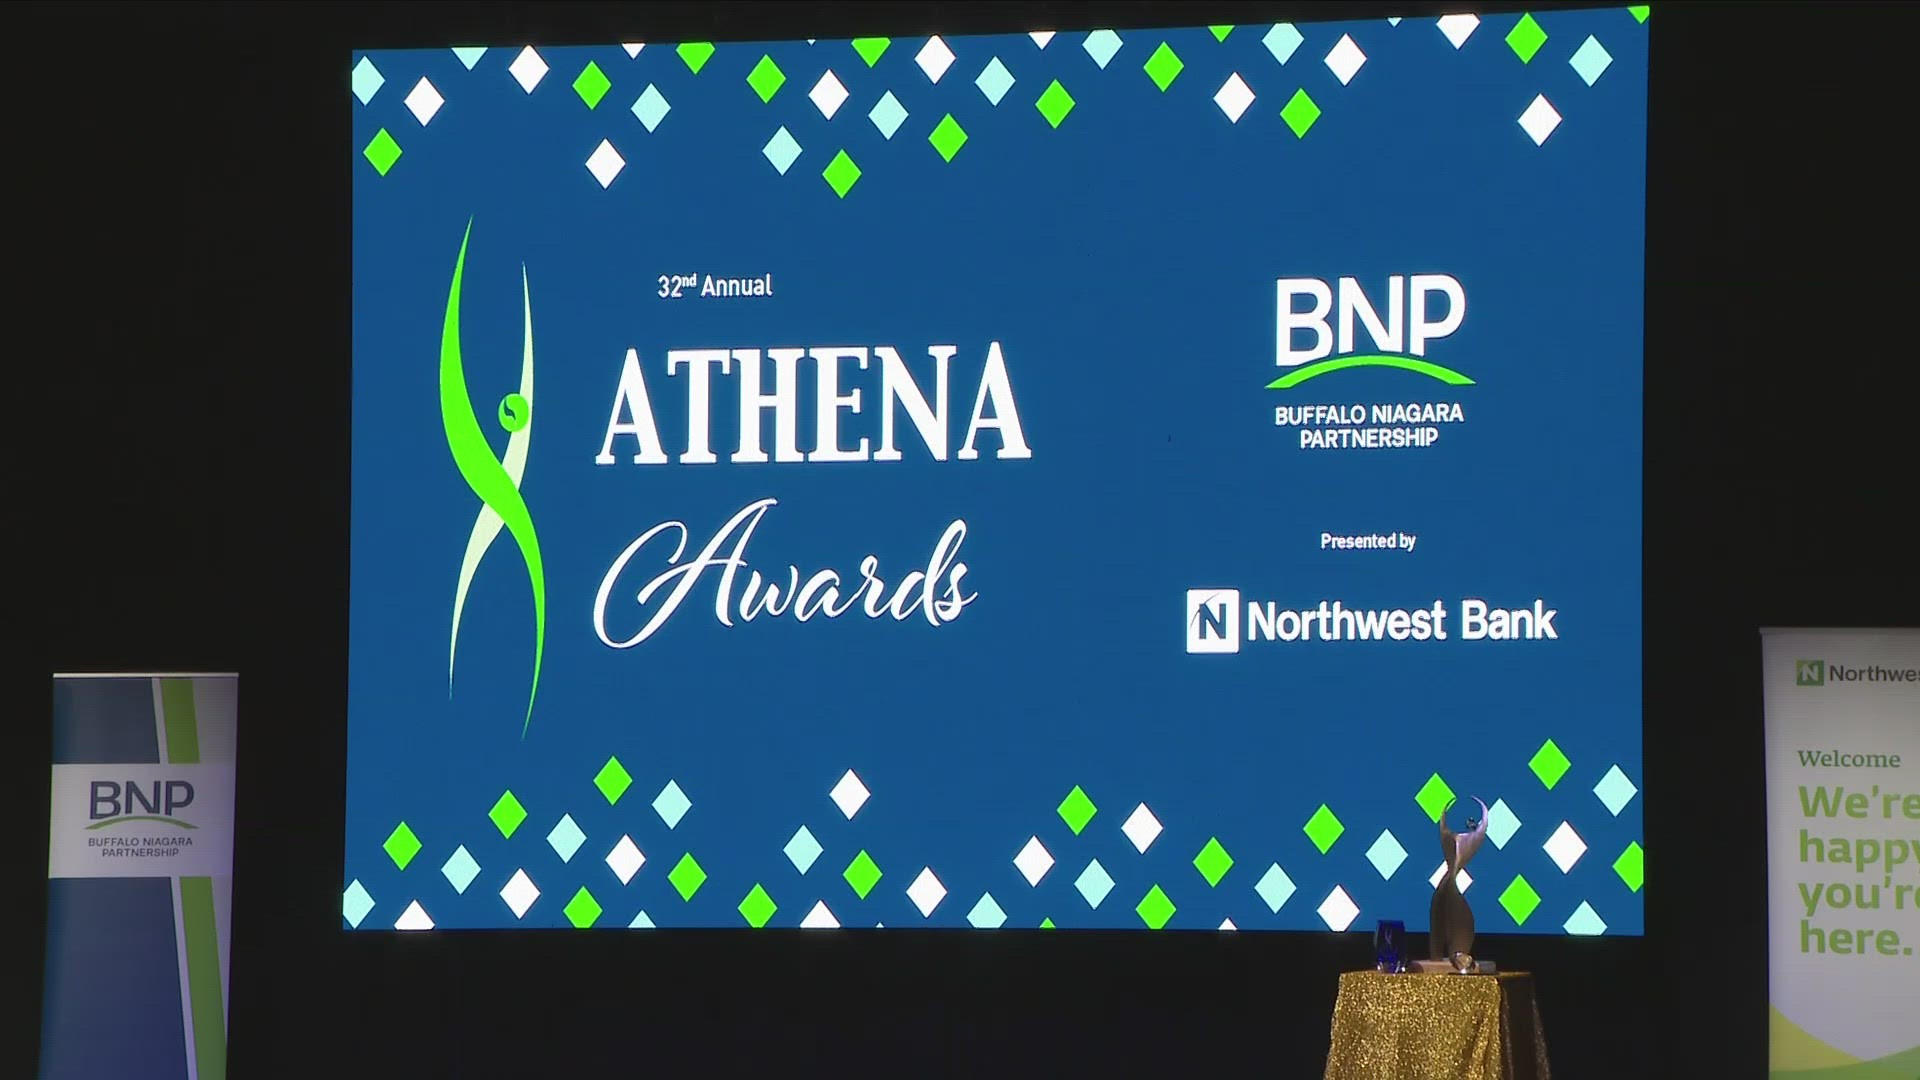 The Athena Awards are celebrated around the world and recognizes the contributions of women and organizations that advance the status of women.